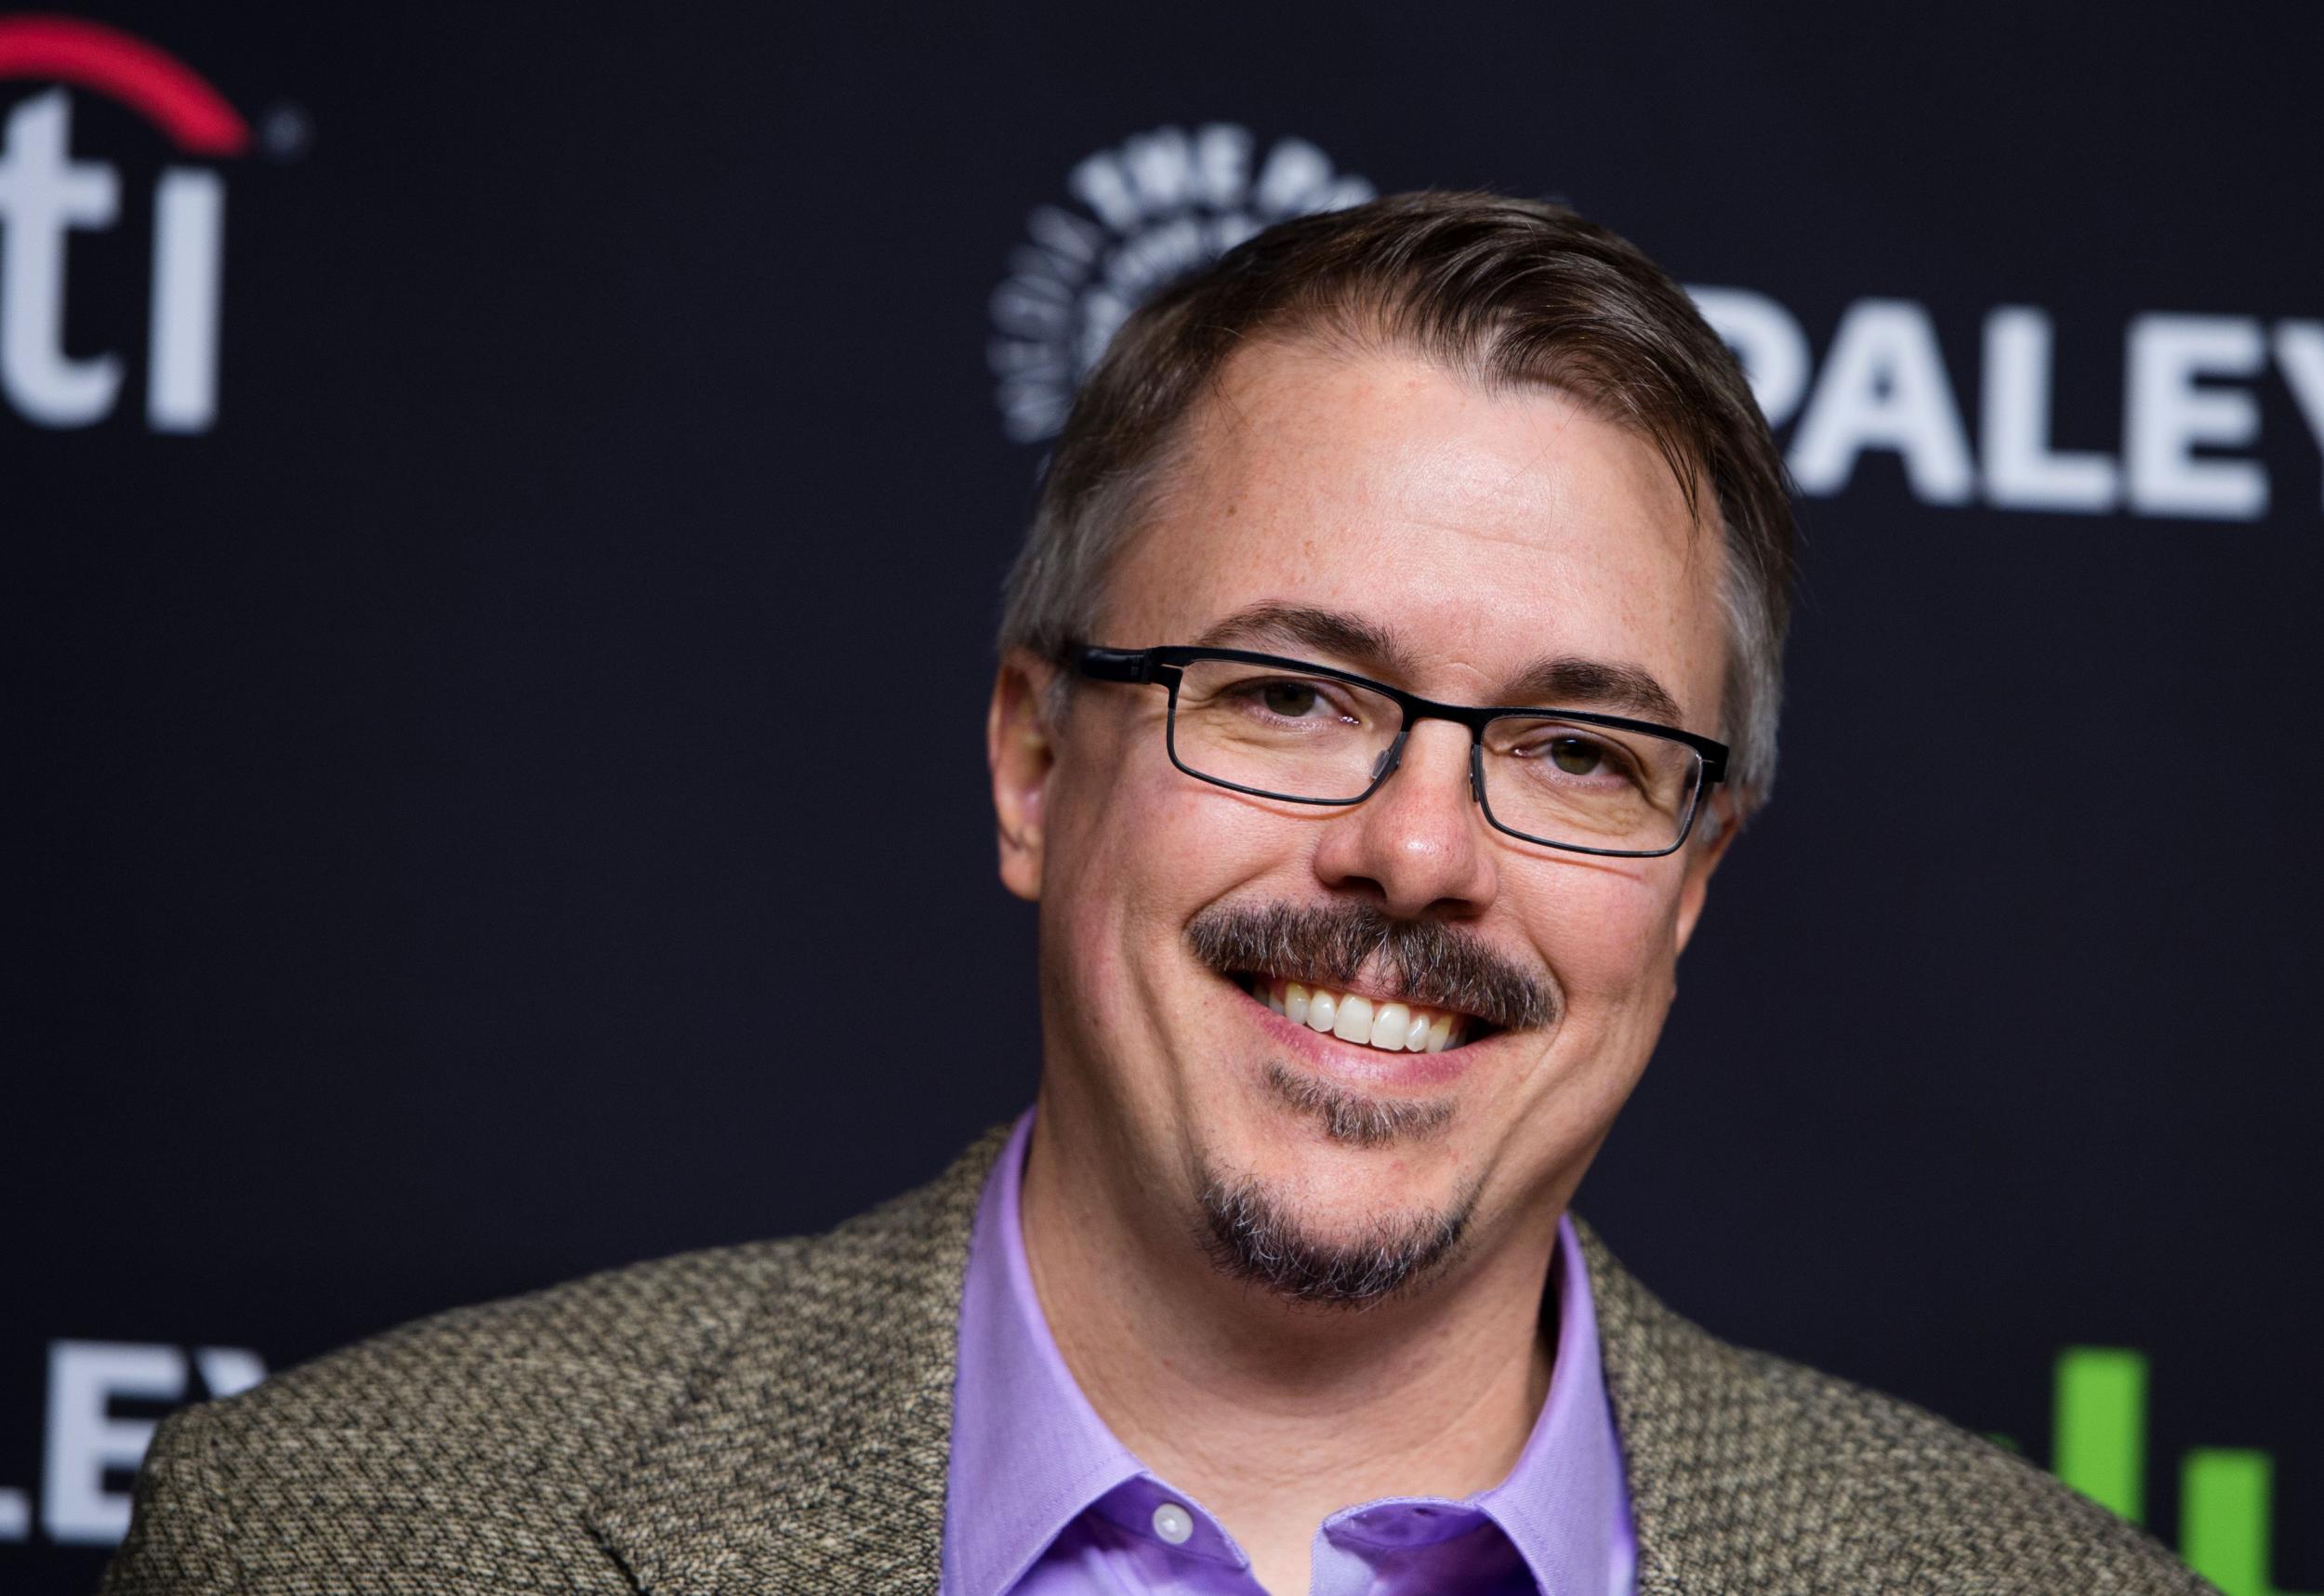 Vince Gilligan lines up first drama series away from the world of Breaking Bad | The ...2500 x 1717